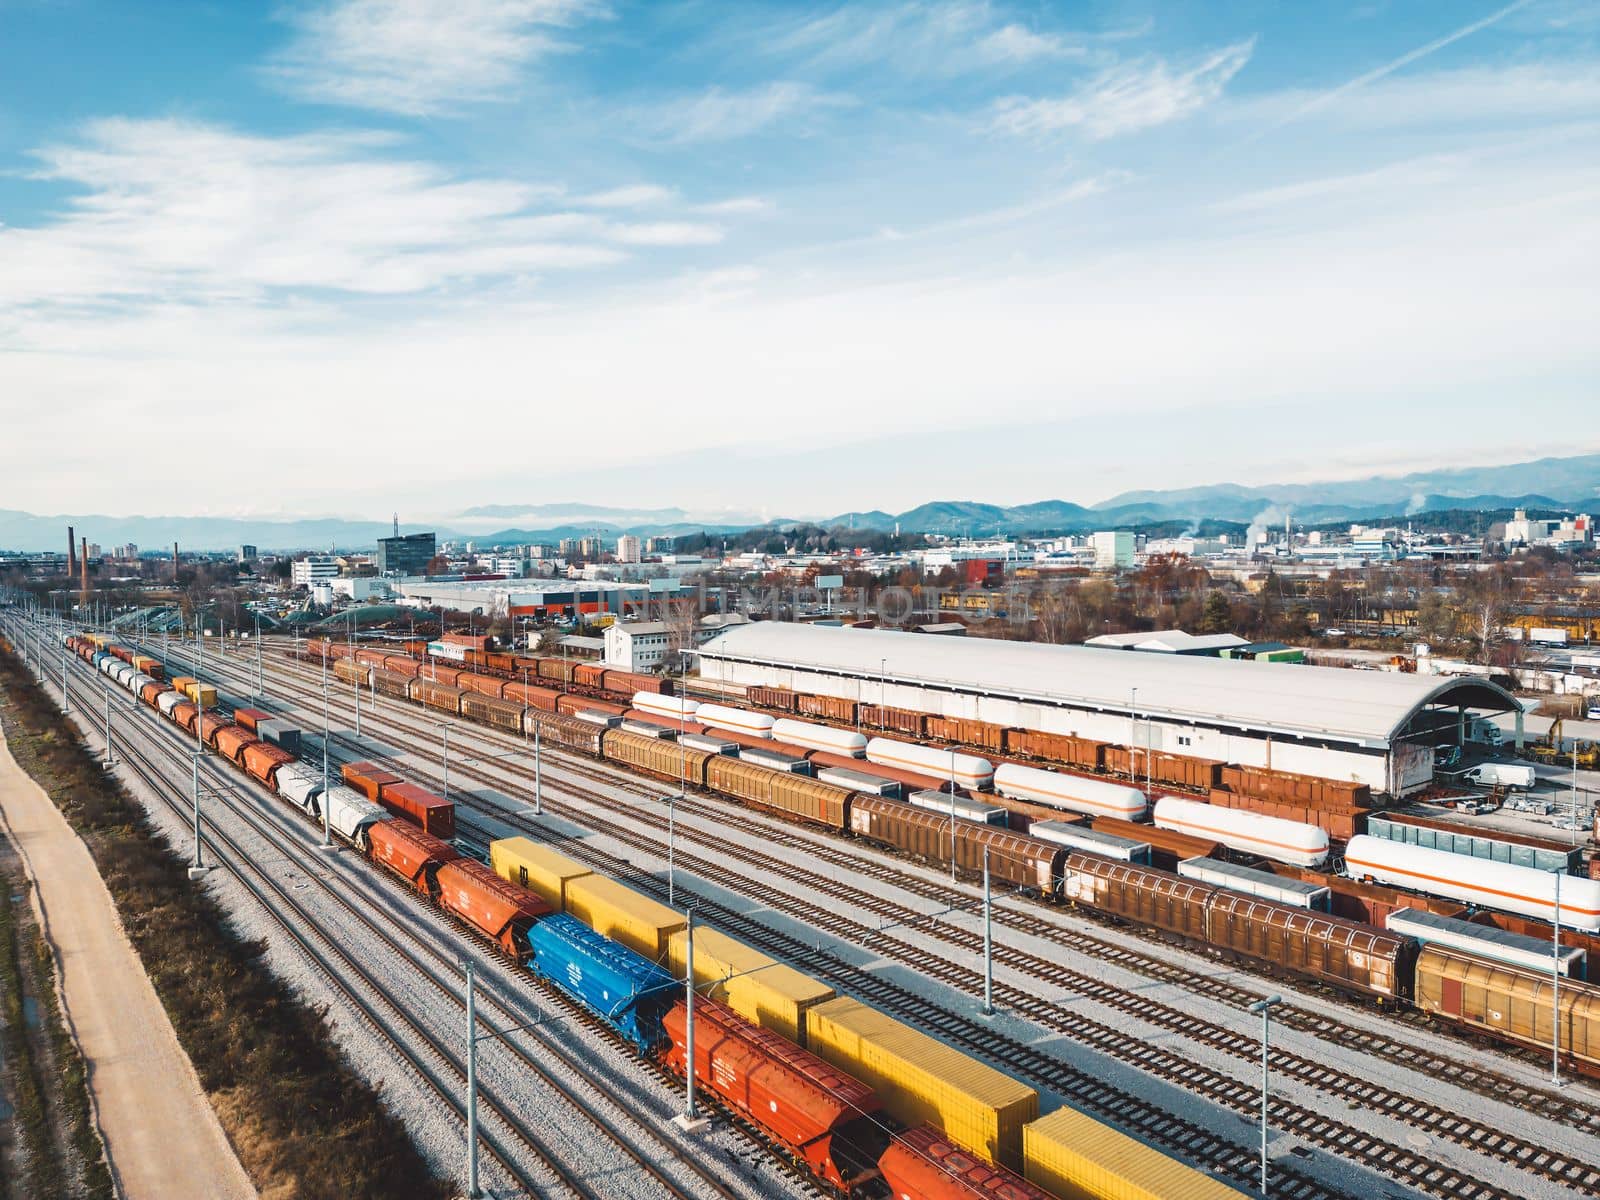 Cargo trains close-up. Aerial view of colorful freight trains on the railway station. Wagons with goods on railroad. Heavy industry. Industrial conceptual scene with trains. Top view from flying drone. High quality photo